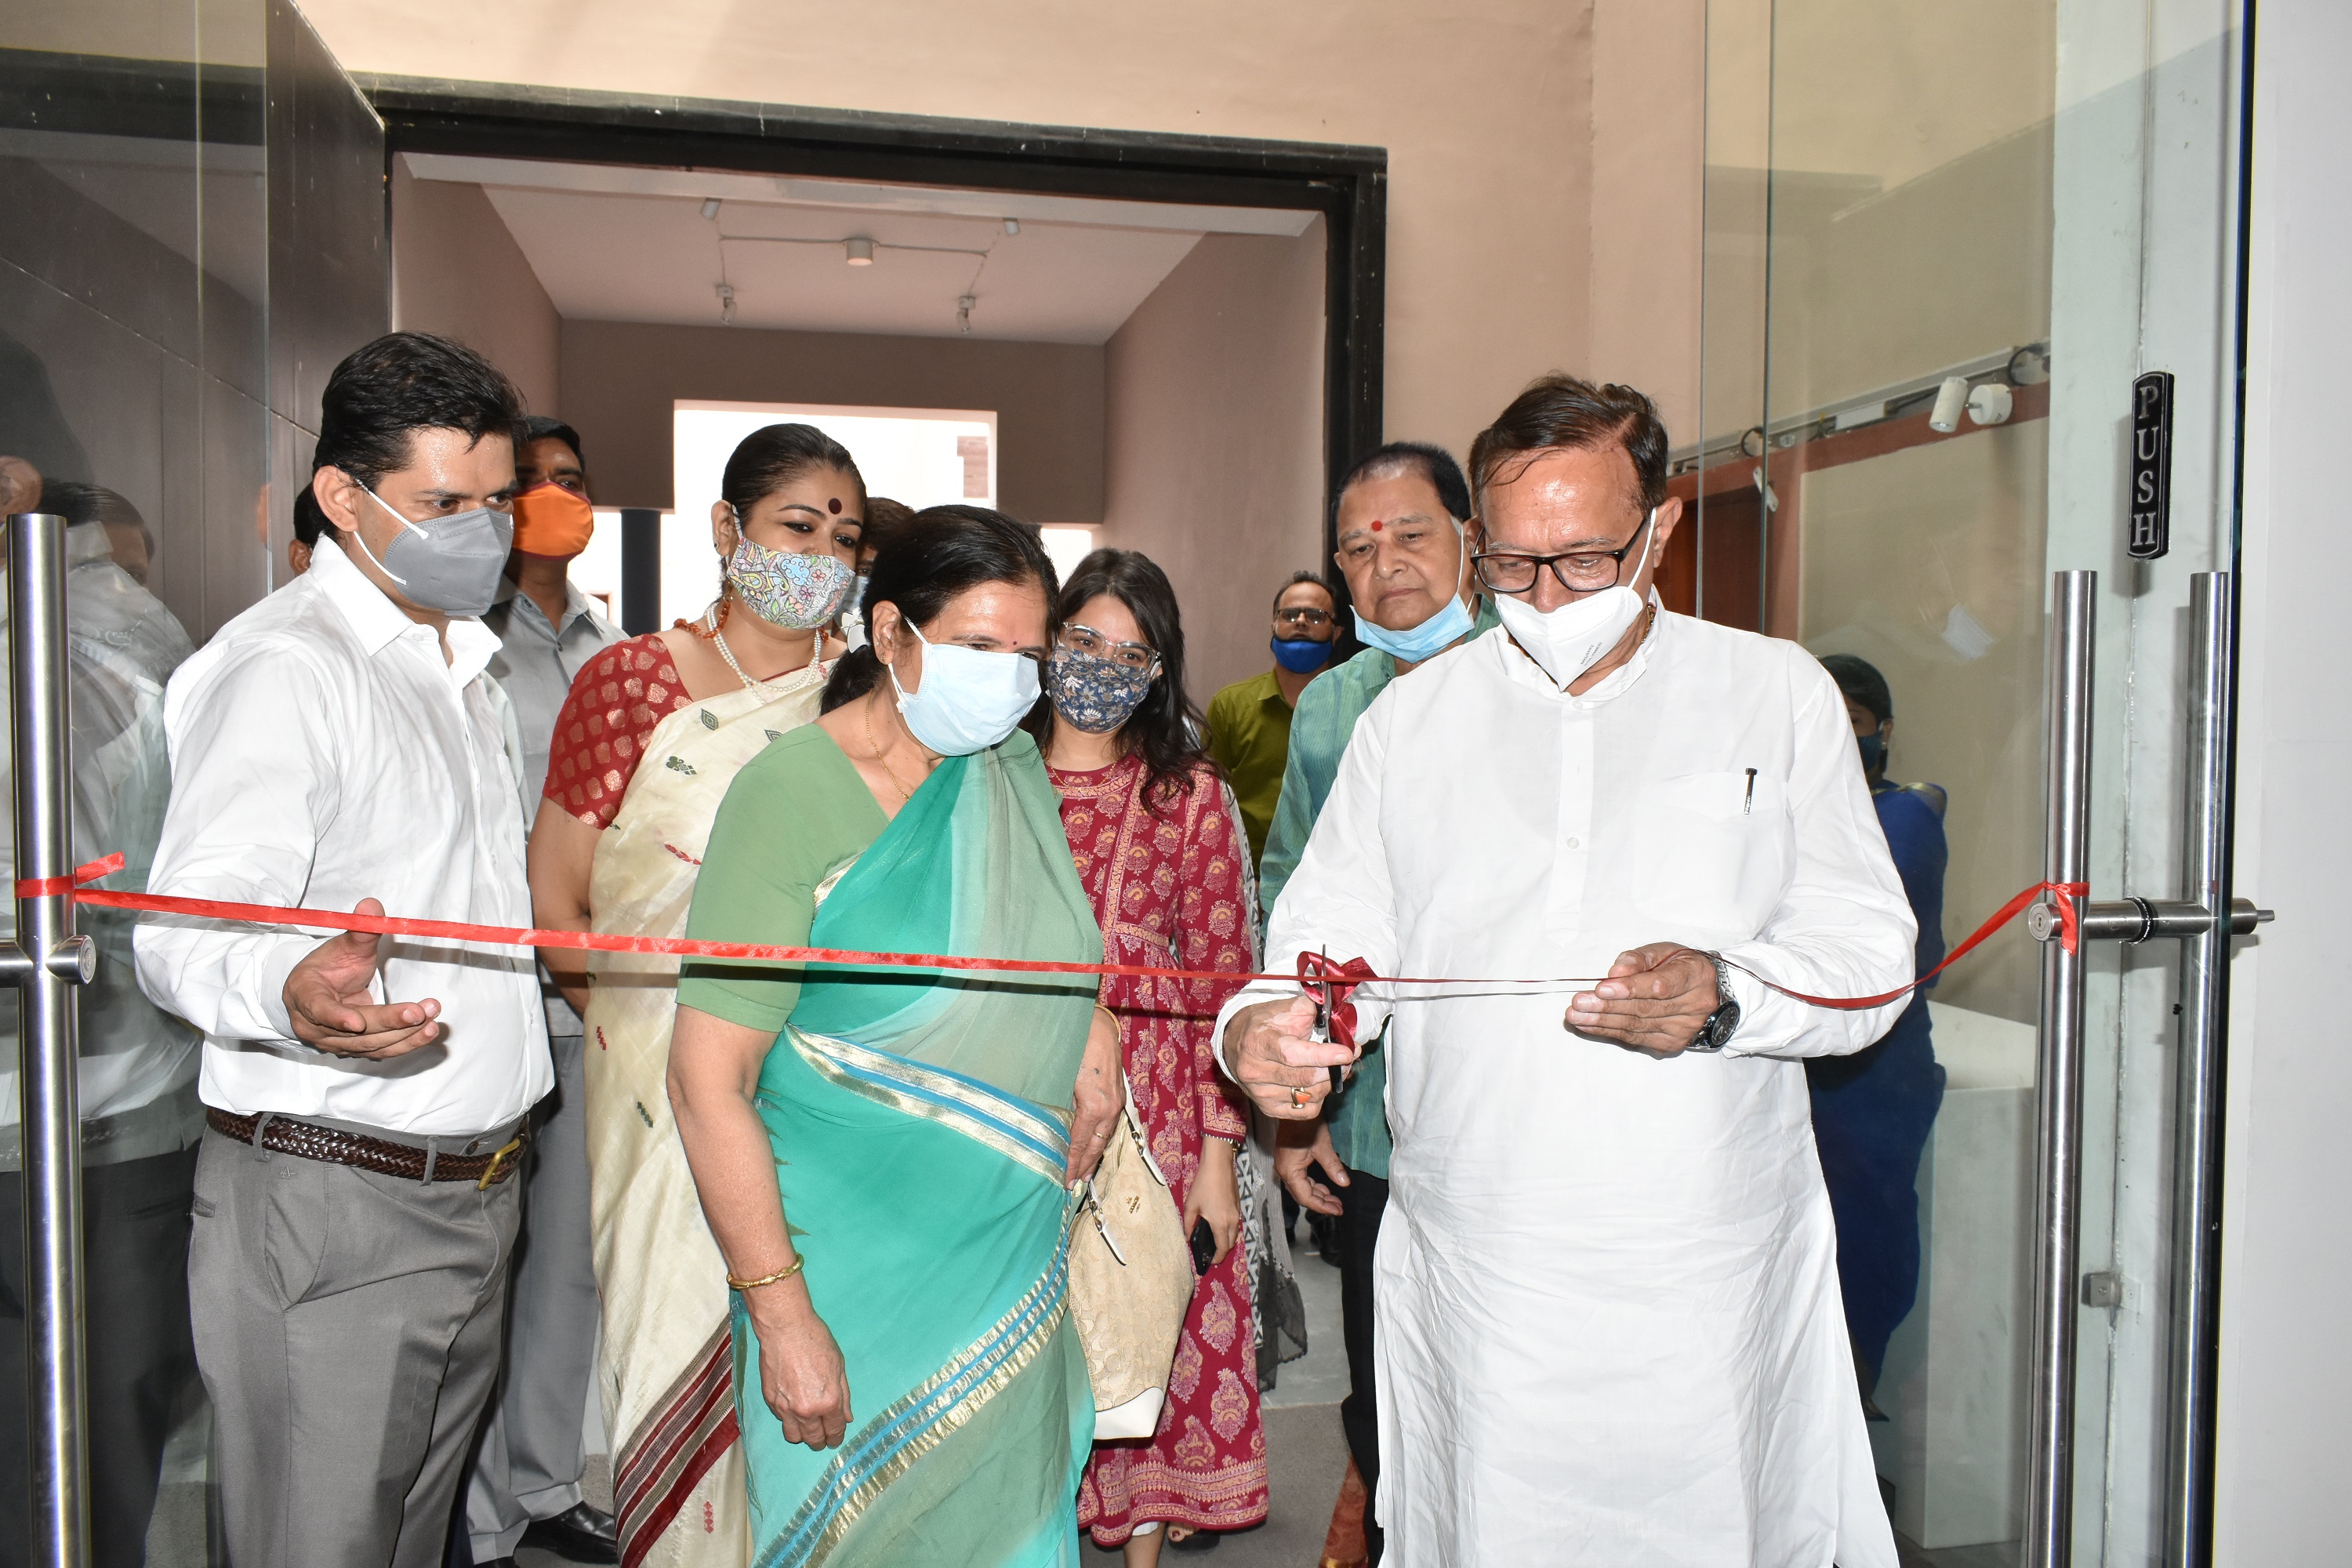 RAJASTHAN MINISTER OF ART & CULTURE INAUGURATES ‘SUSTAIN BY CARTIST’ EXHIBITION AT JKK